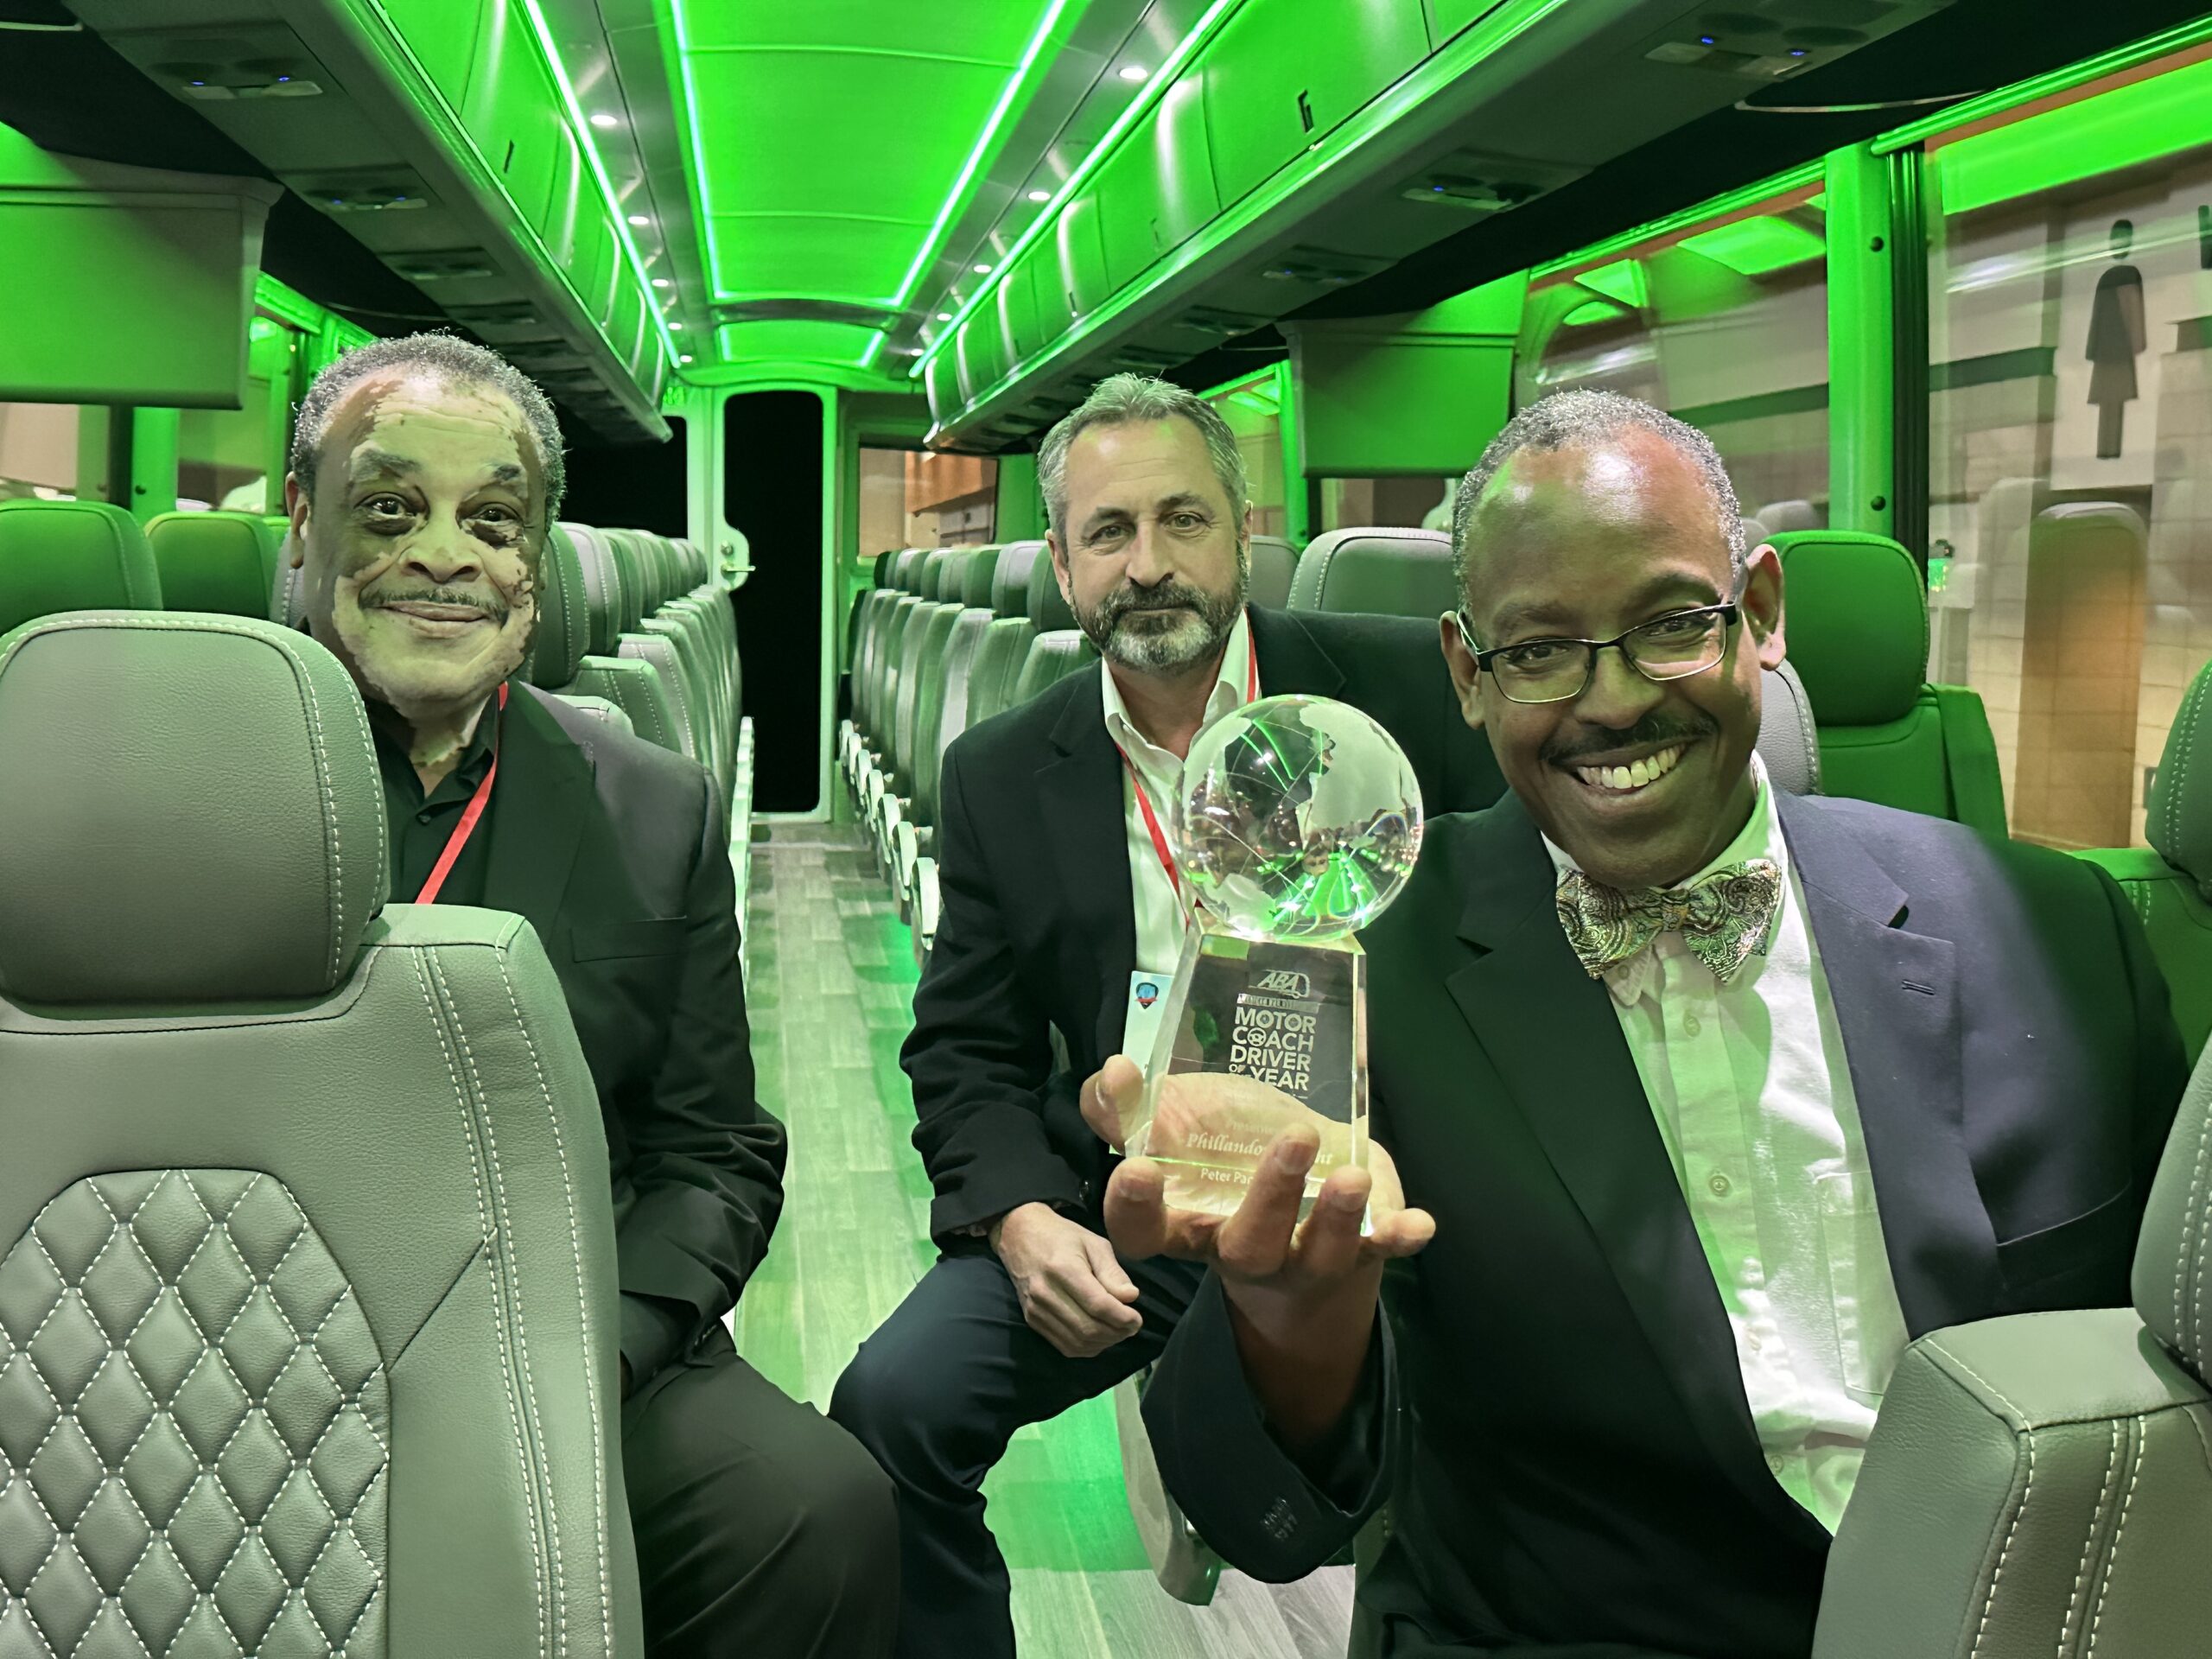 Motorcoach Driver with Over 2 Million Safe Driving Miles Selected for National Safety Honor